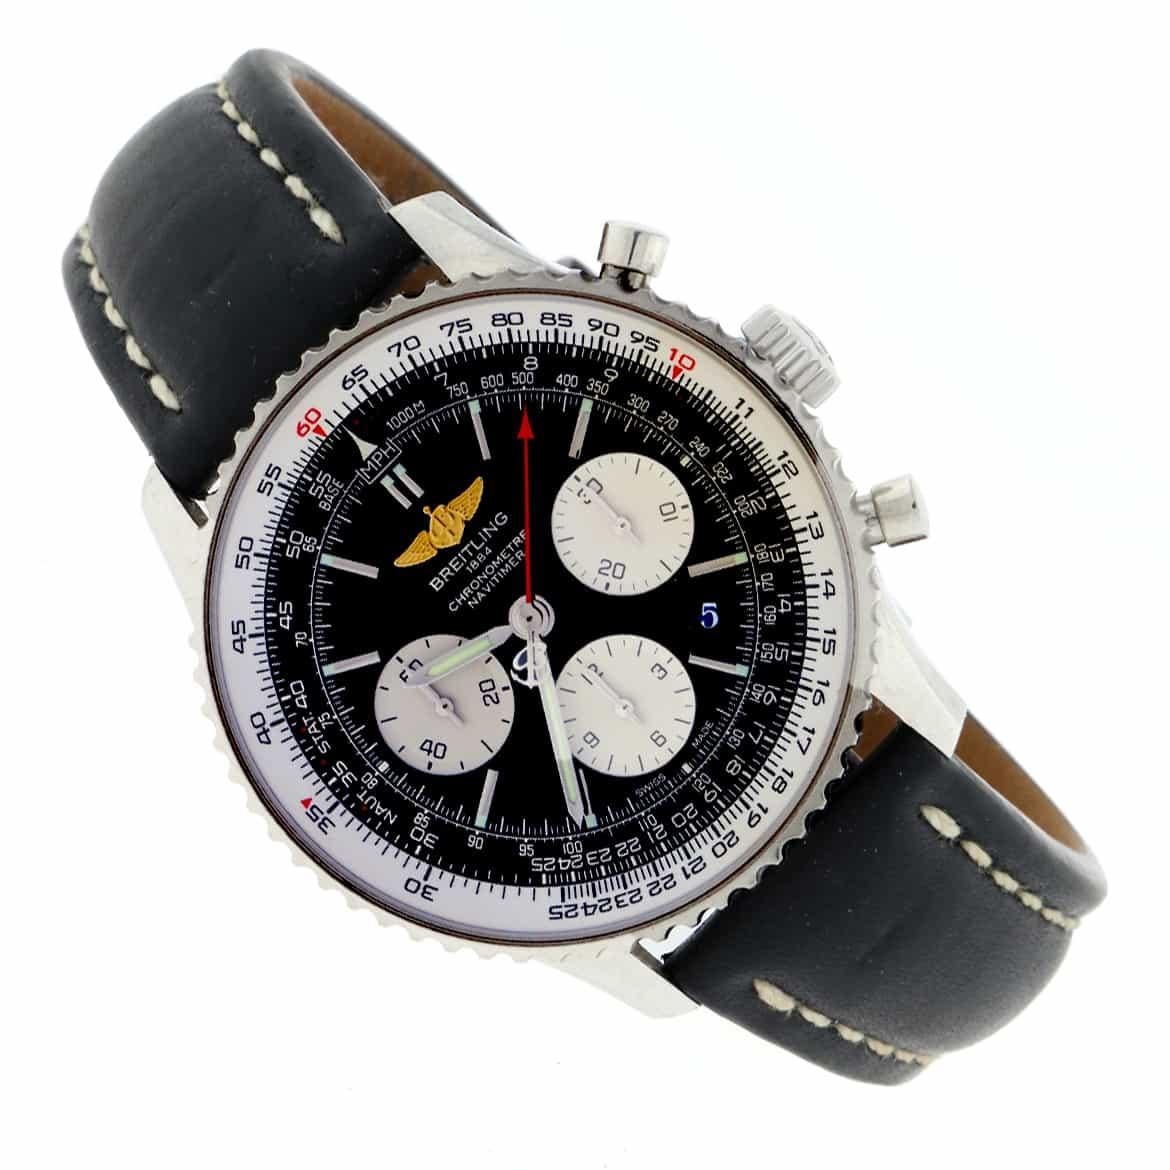 Breitling Navitimer 01 Chronograph Black Dial Automatic Watch In Excellent Condition For Sale In New York, NY